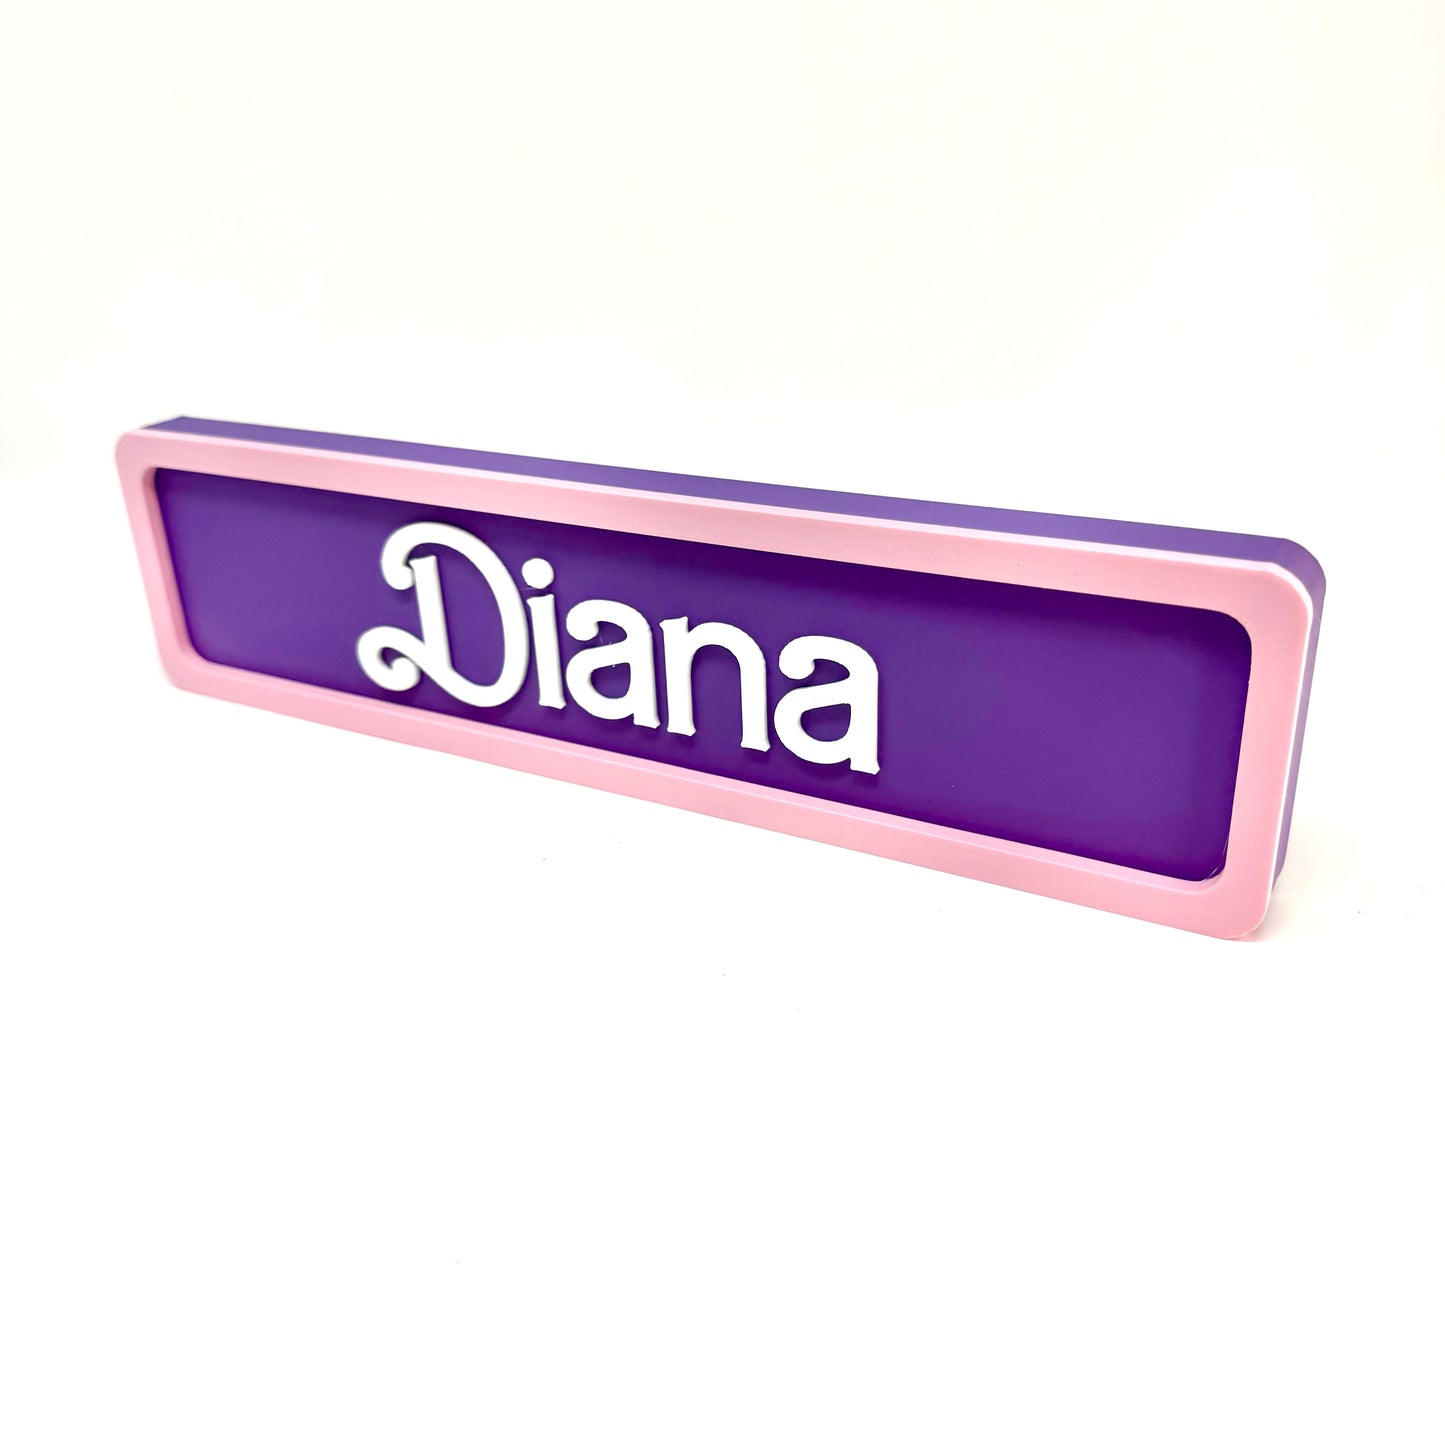 Barbie-Inspired Personalized Custom 3D-Printed Name Sign